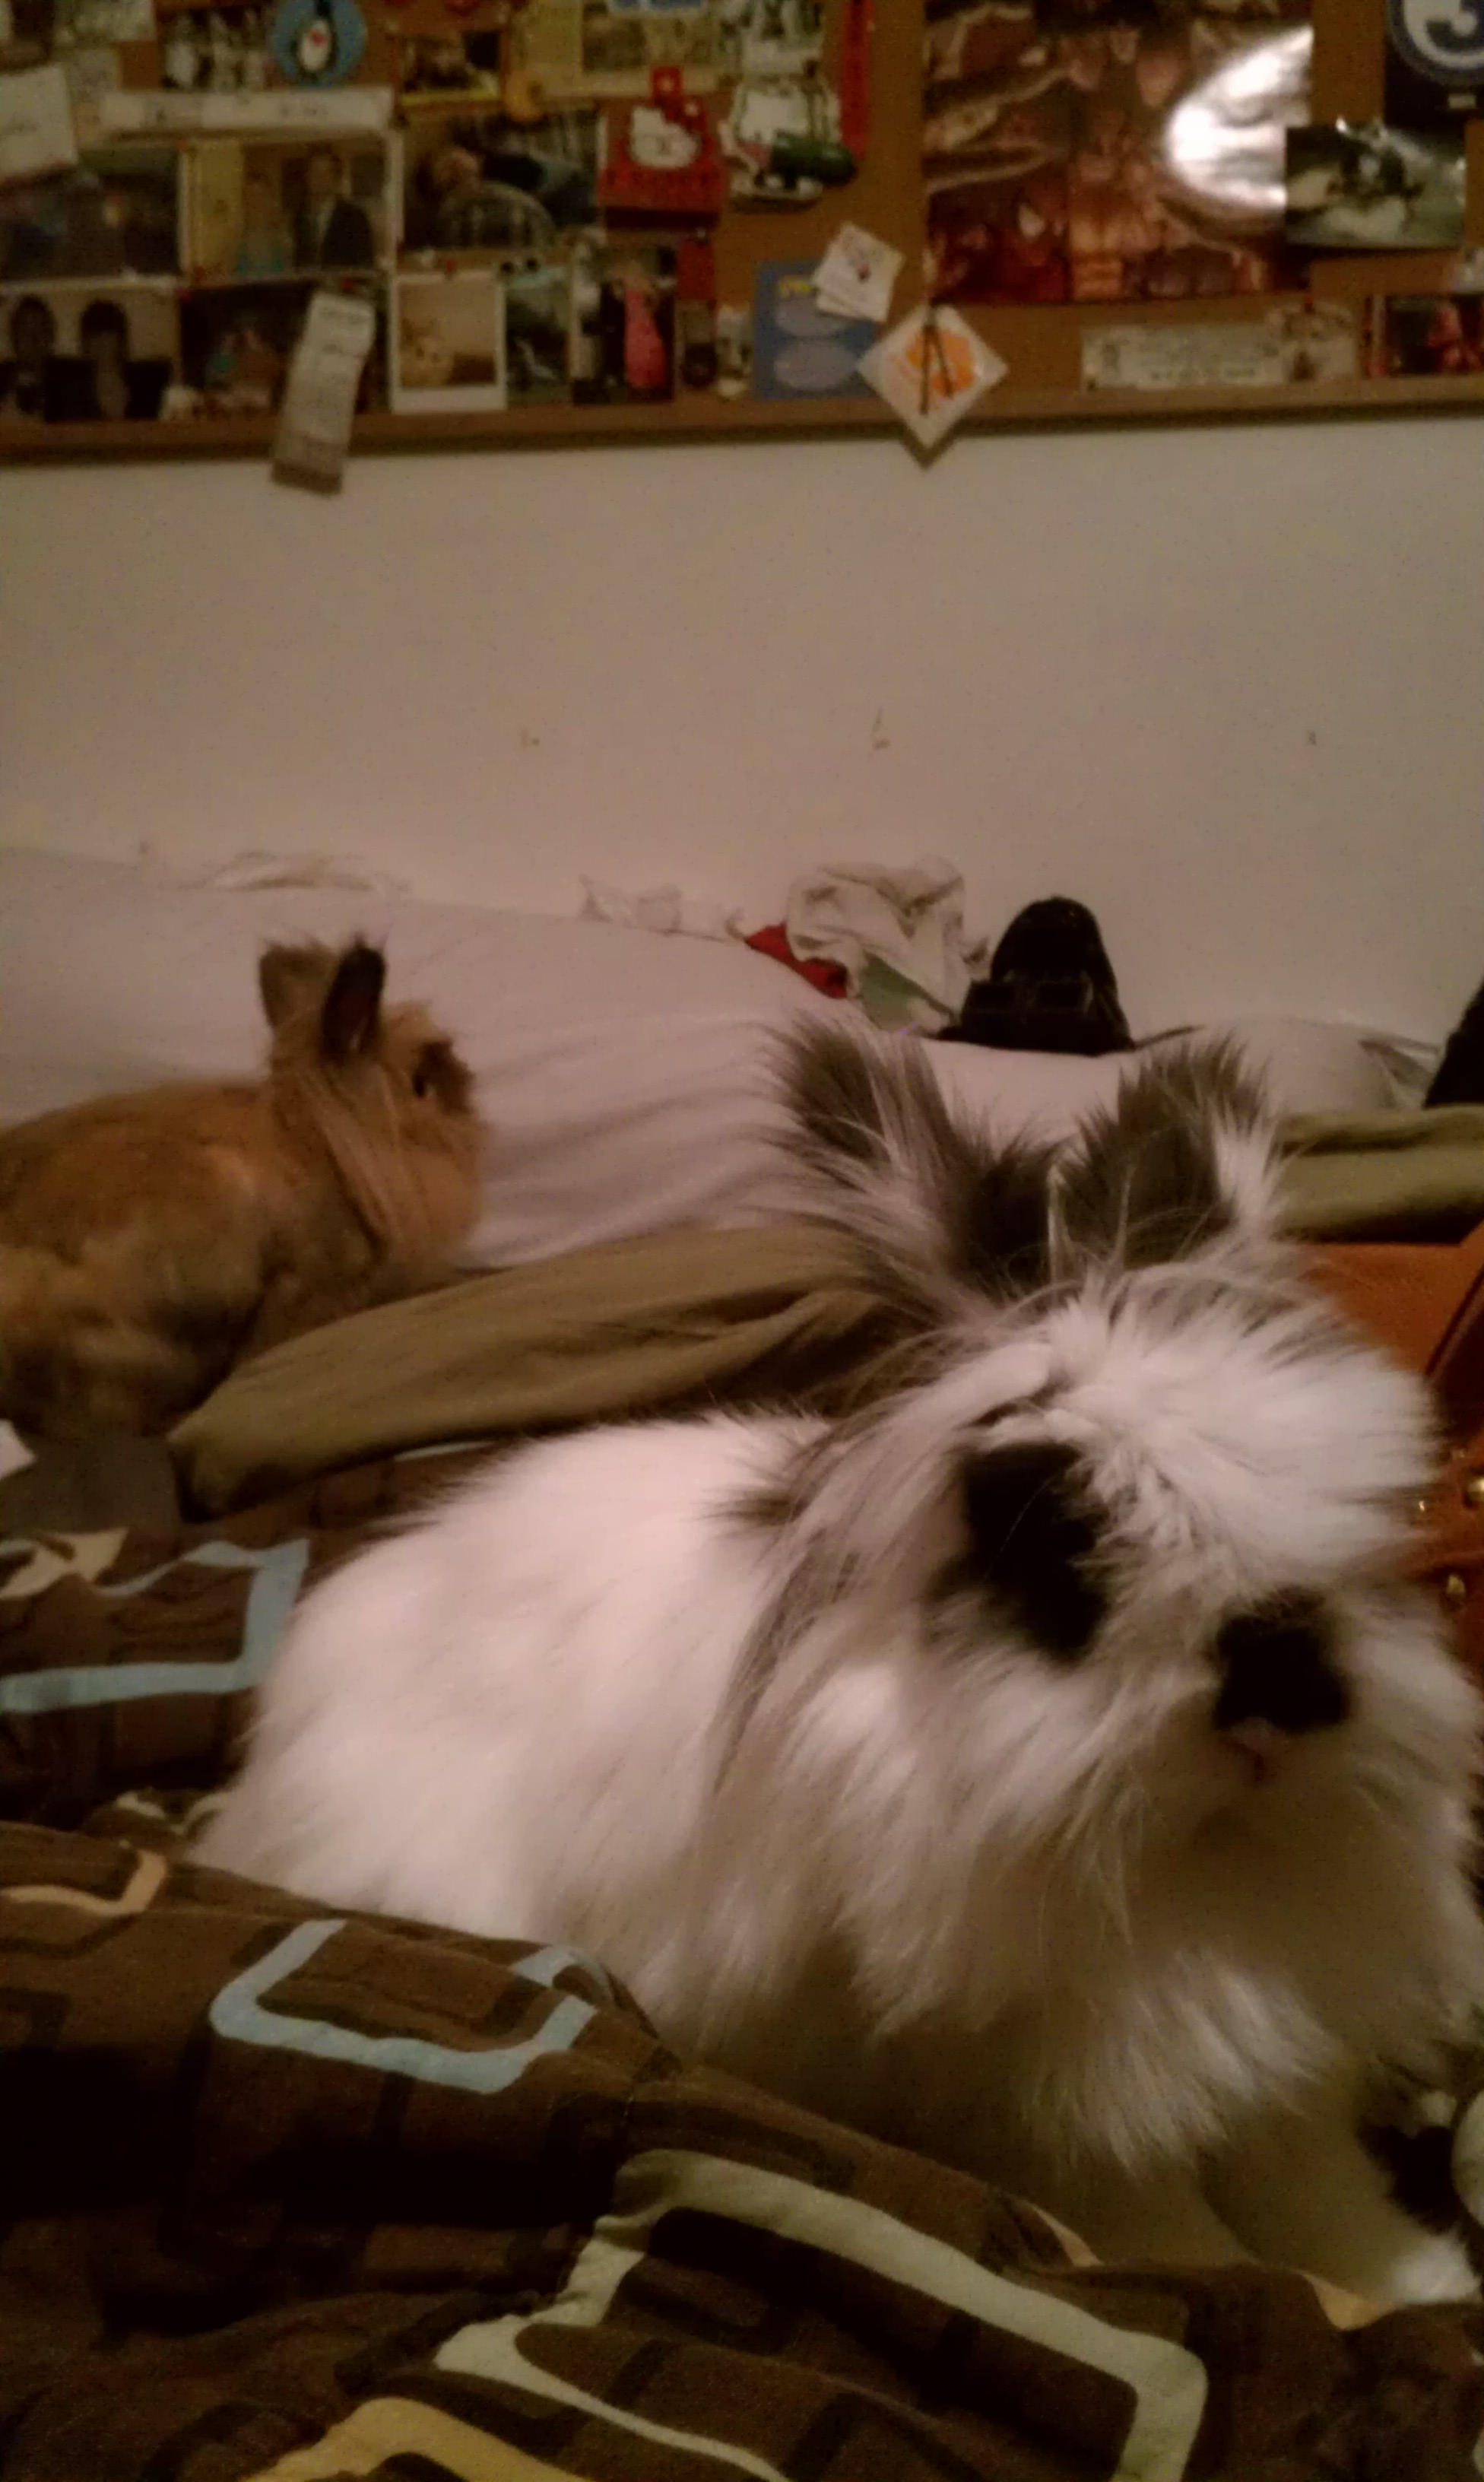 Bunnies Have Infiltrated Their Human's Sleeping Space